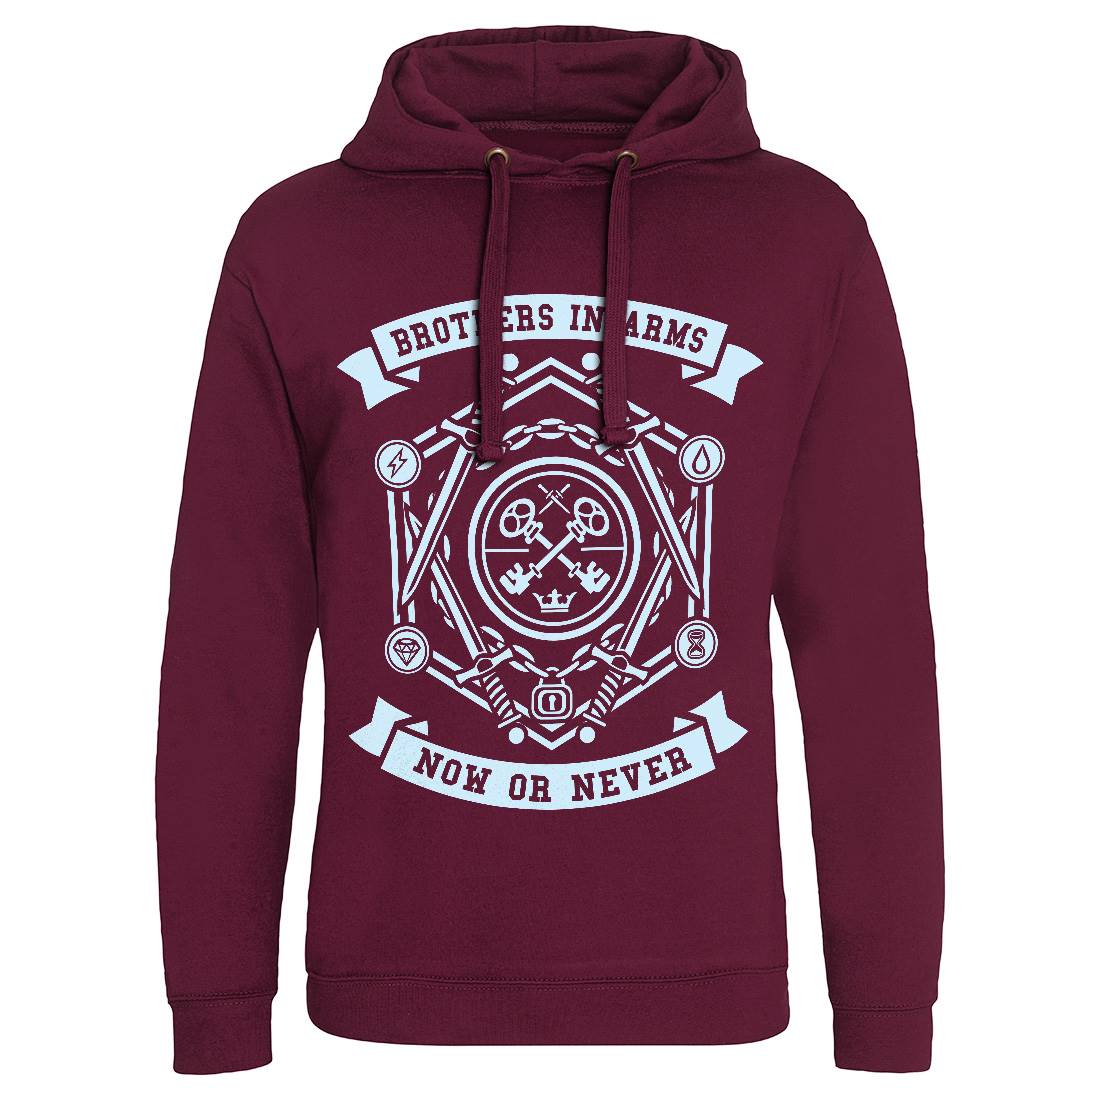 Keys Mens Hoodie Without Pocket Religion A076